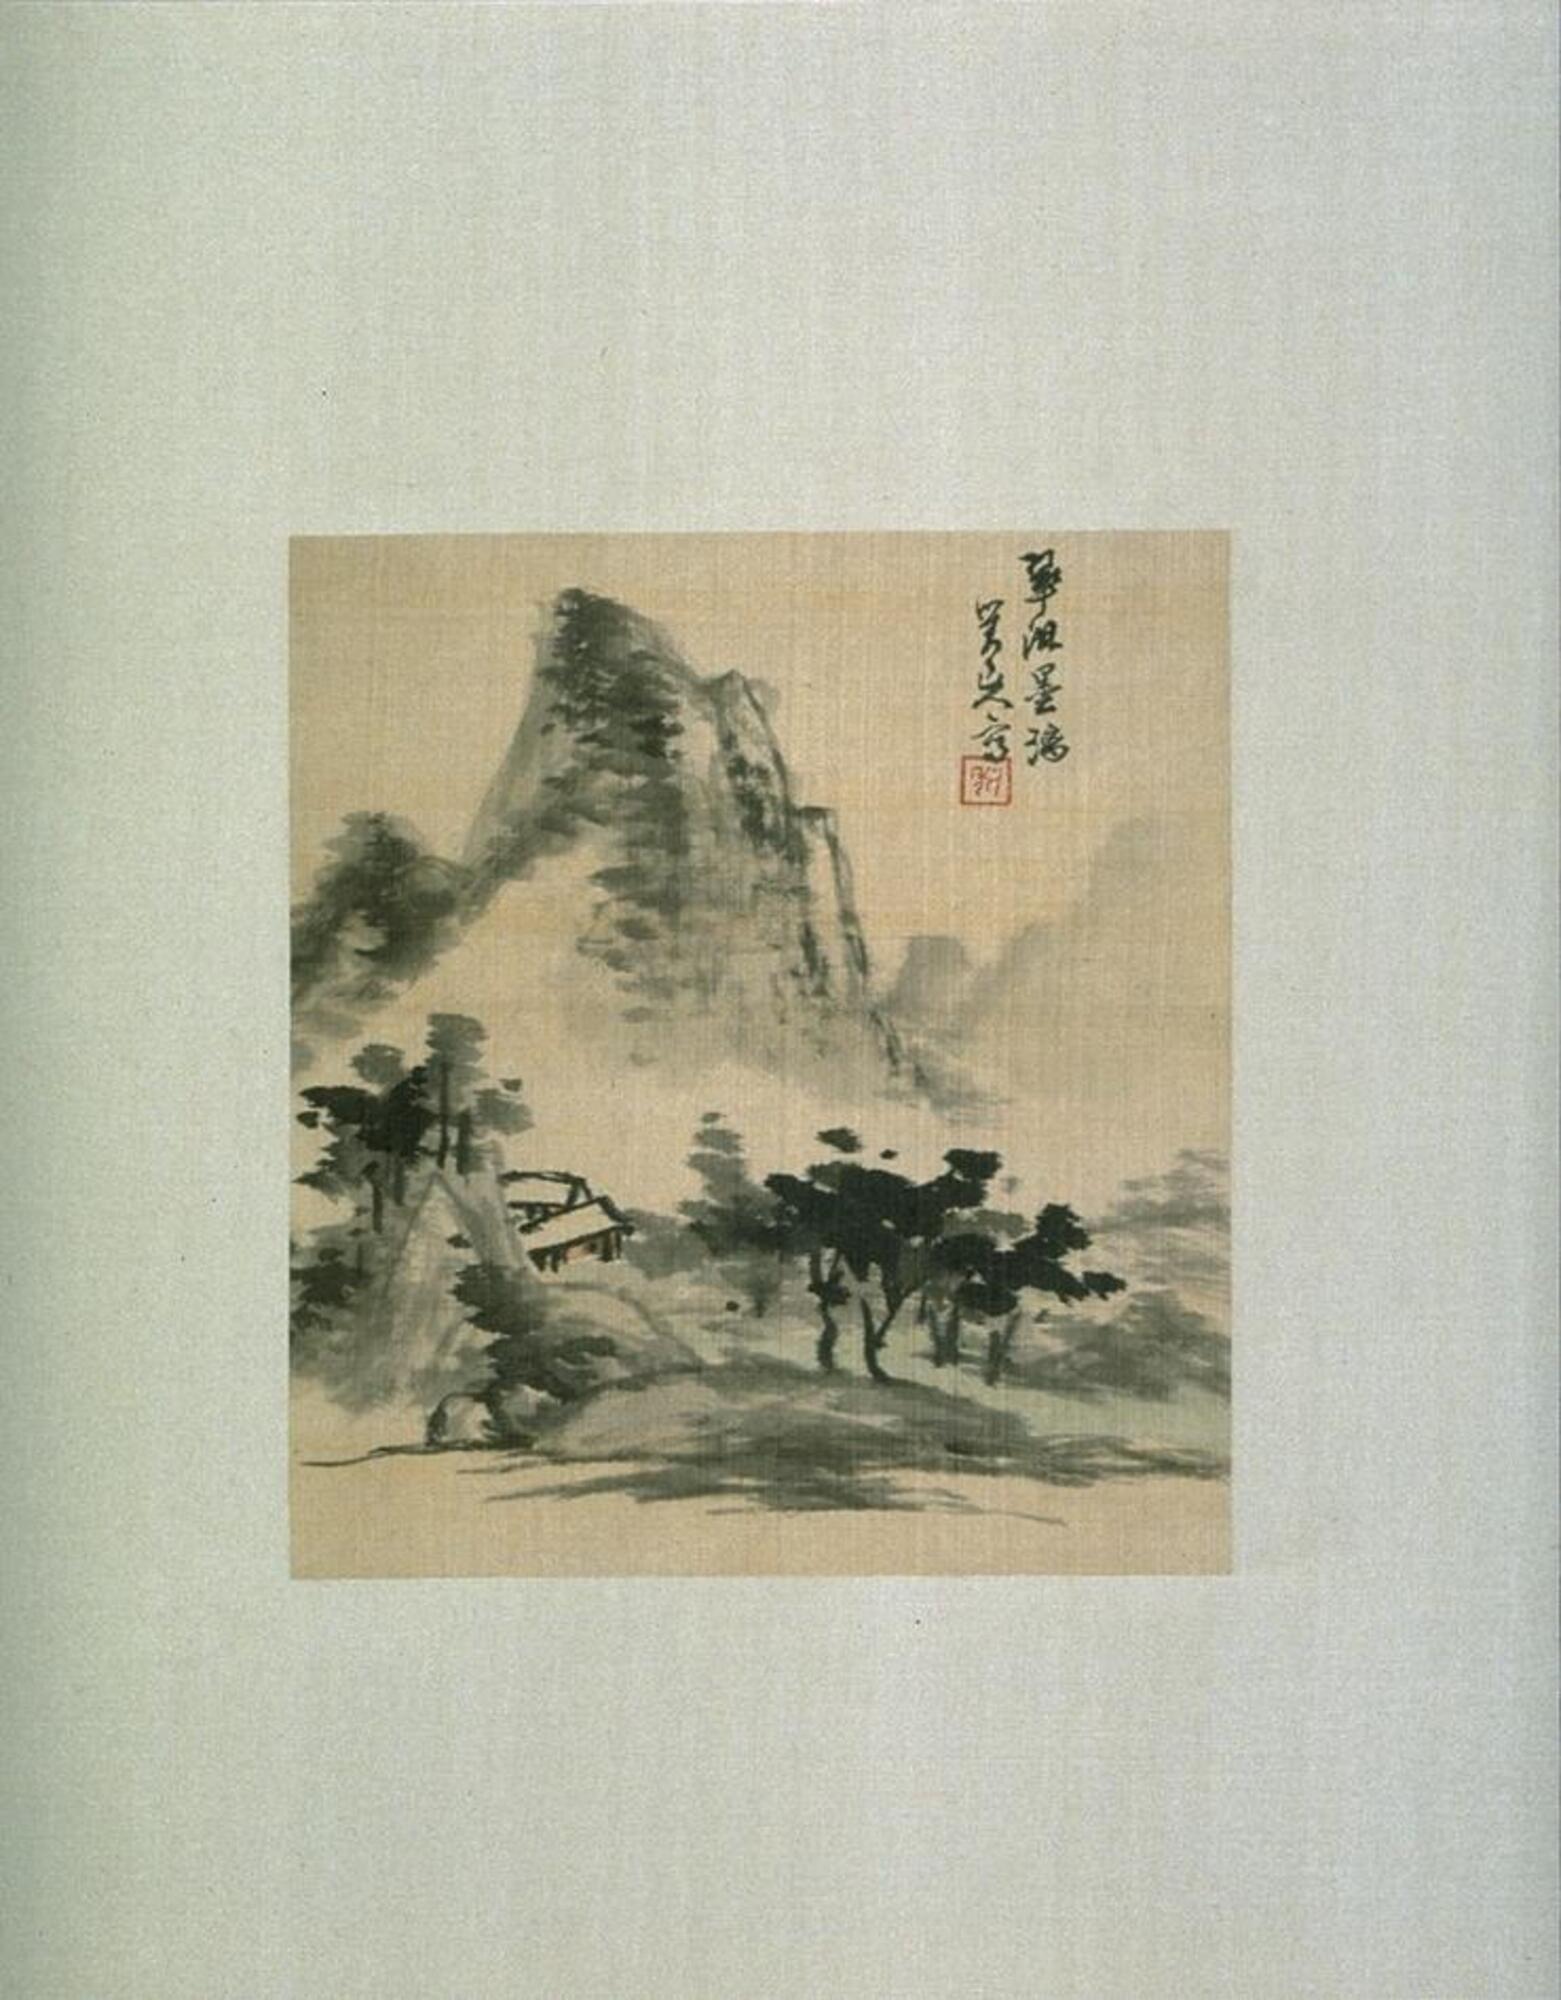 In the background, there are tall mountains with smaller hills and trees in front. There are also two buildings that are partially hidden behind one of the hills. In the upper right corner, there is s seal and signature of the artist.